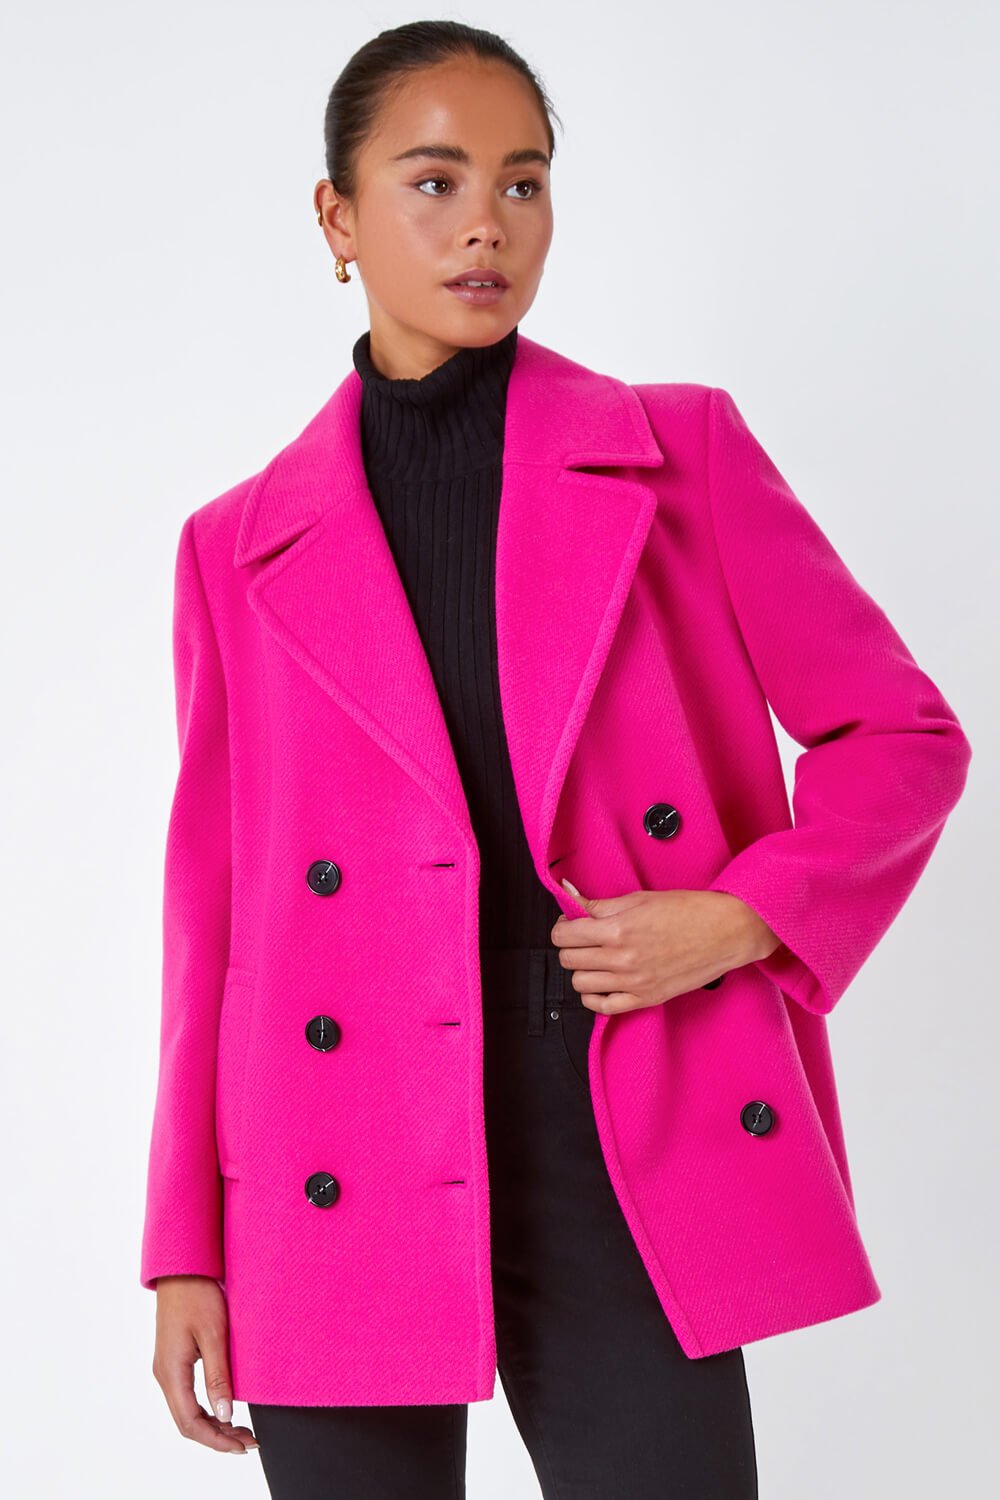 PINK Petite Double Breasted Smart Coat, Image 4 of 5